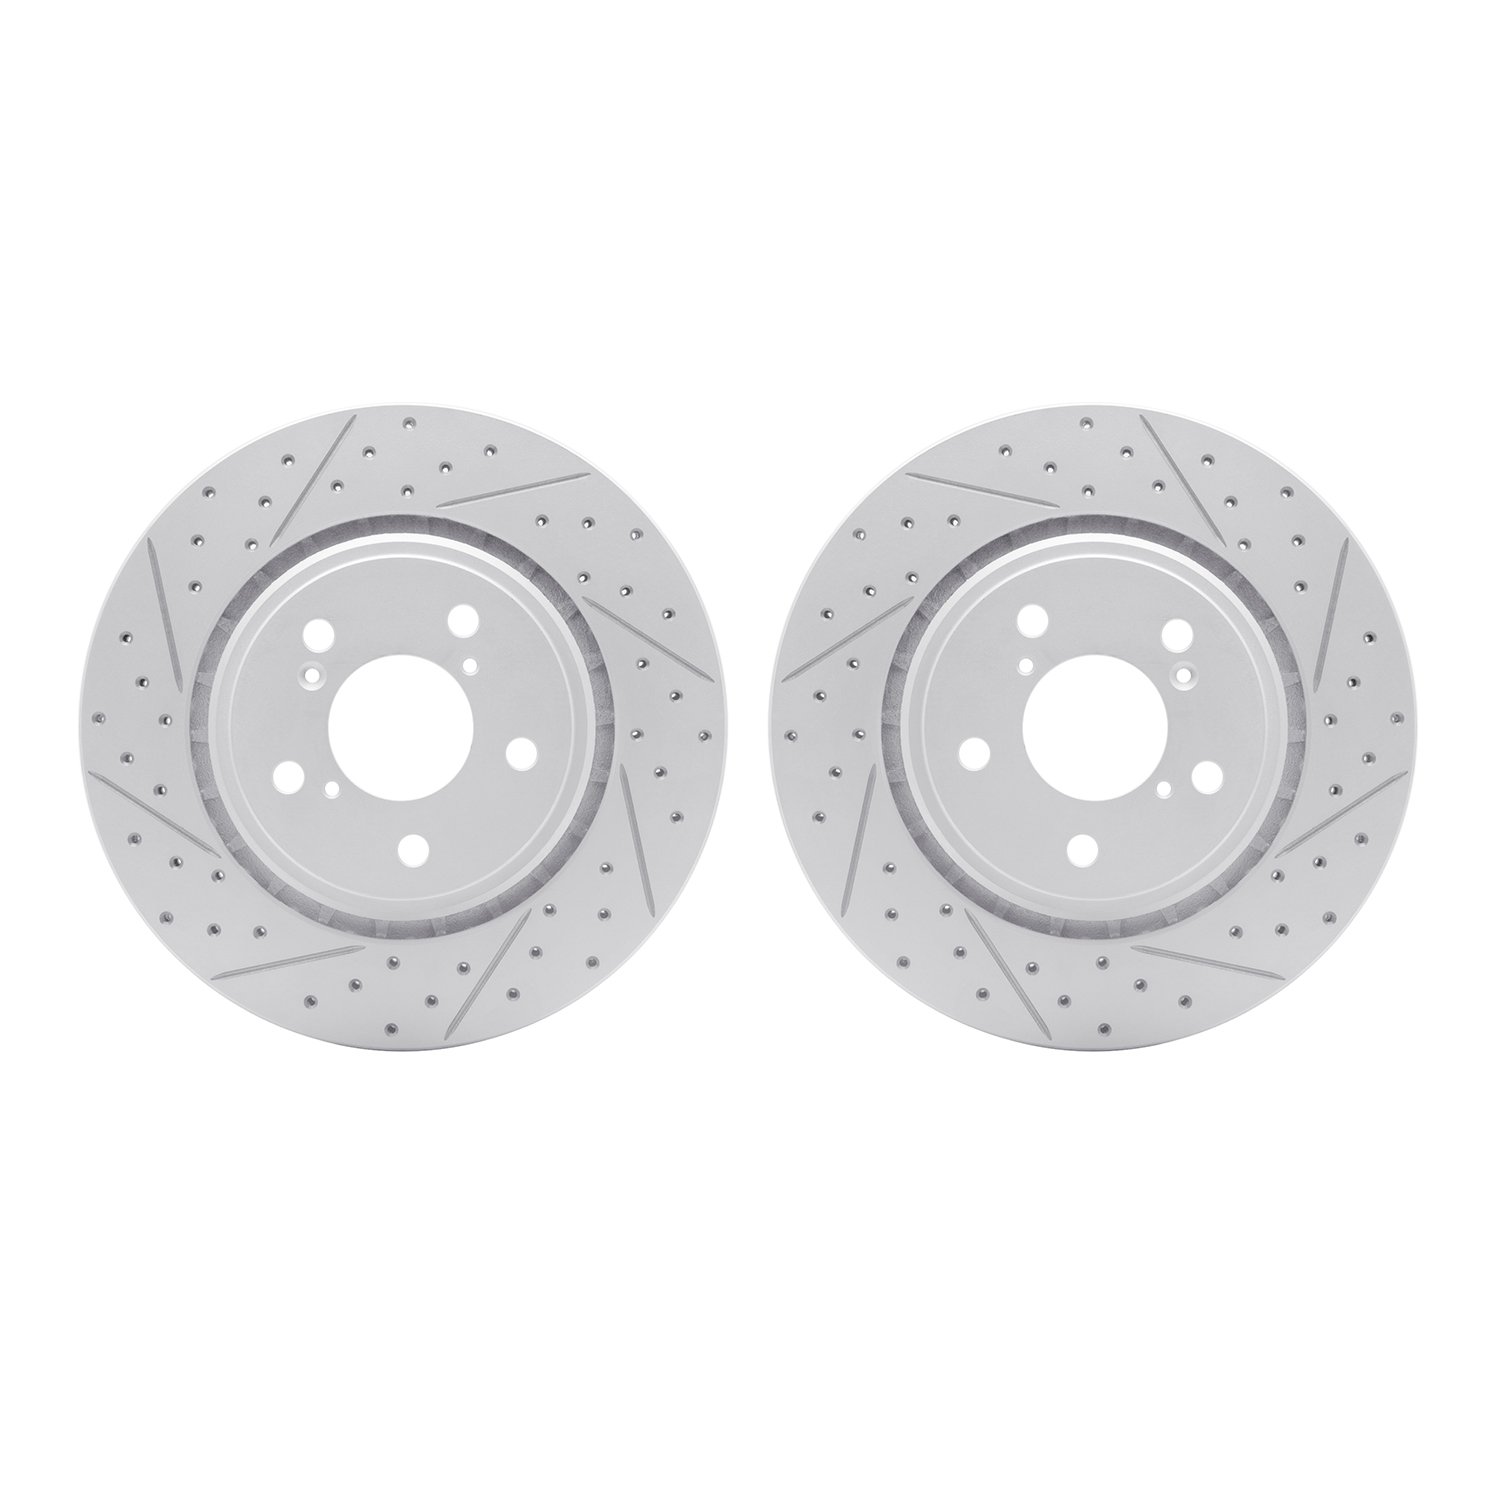 2002-59012 Geoperformance Drilled/Slotted Brake Rotors, Fits Select Acura/Honda, Position: Front